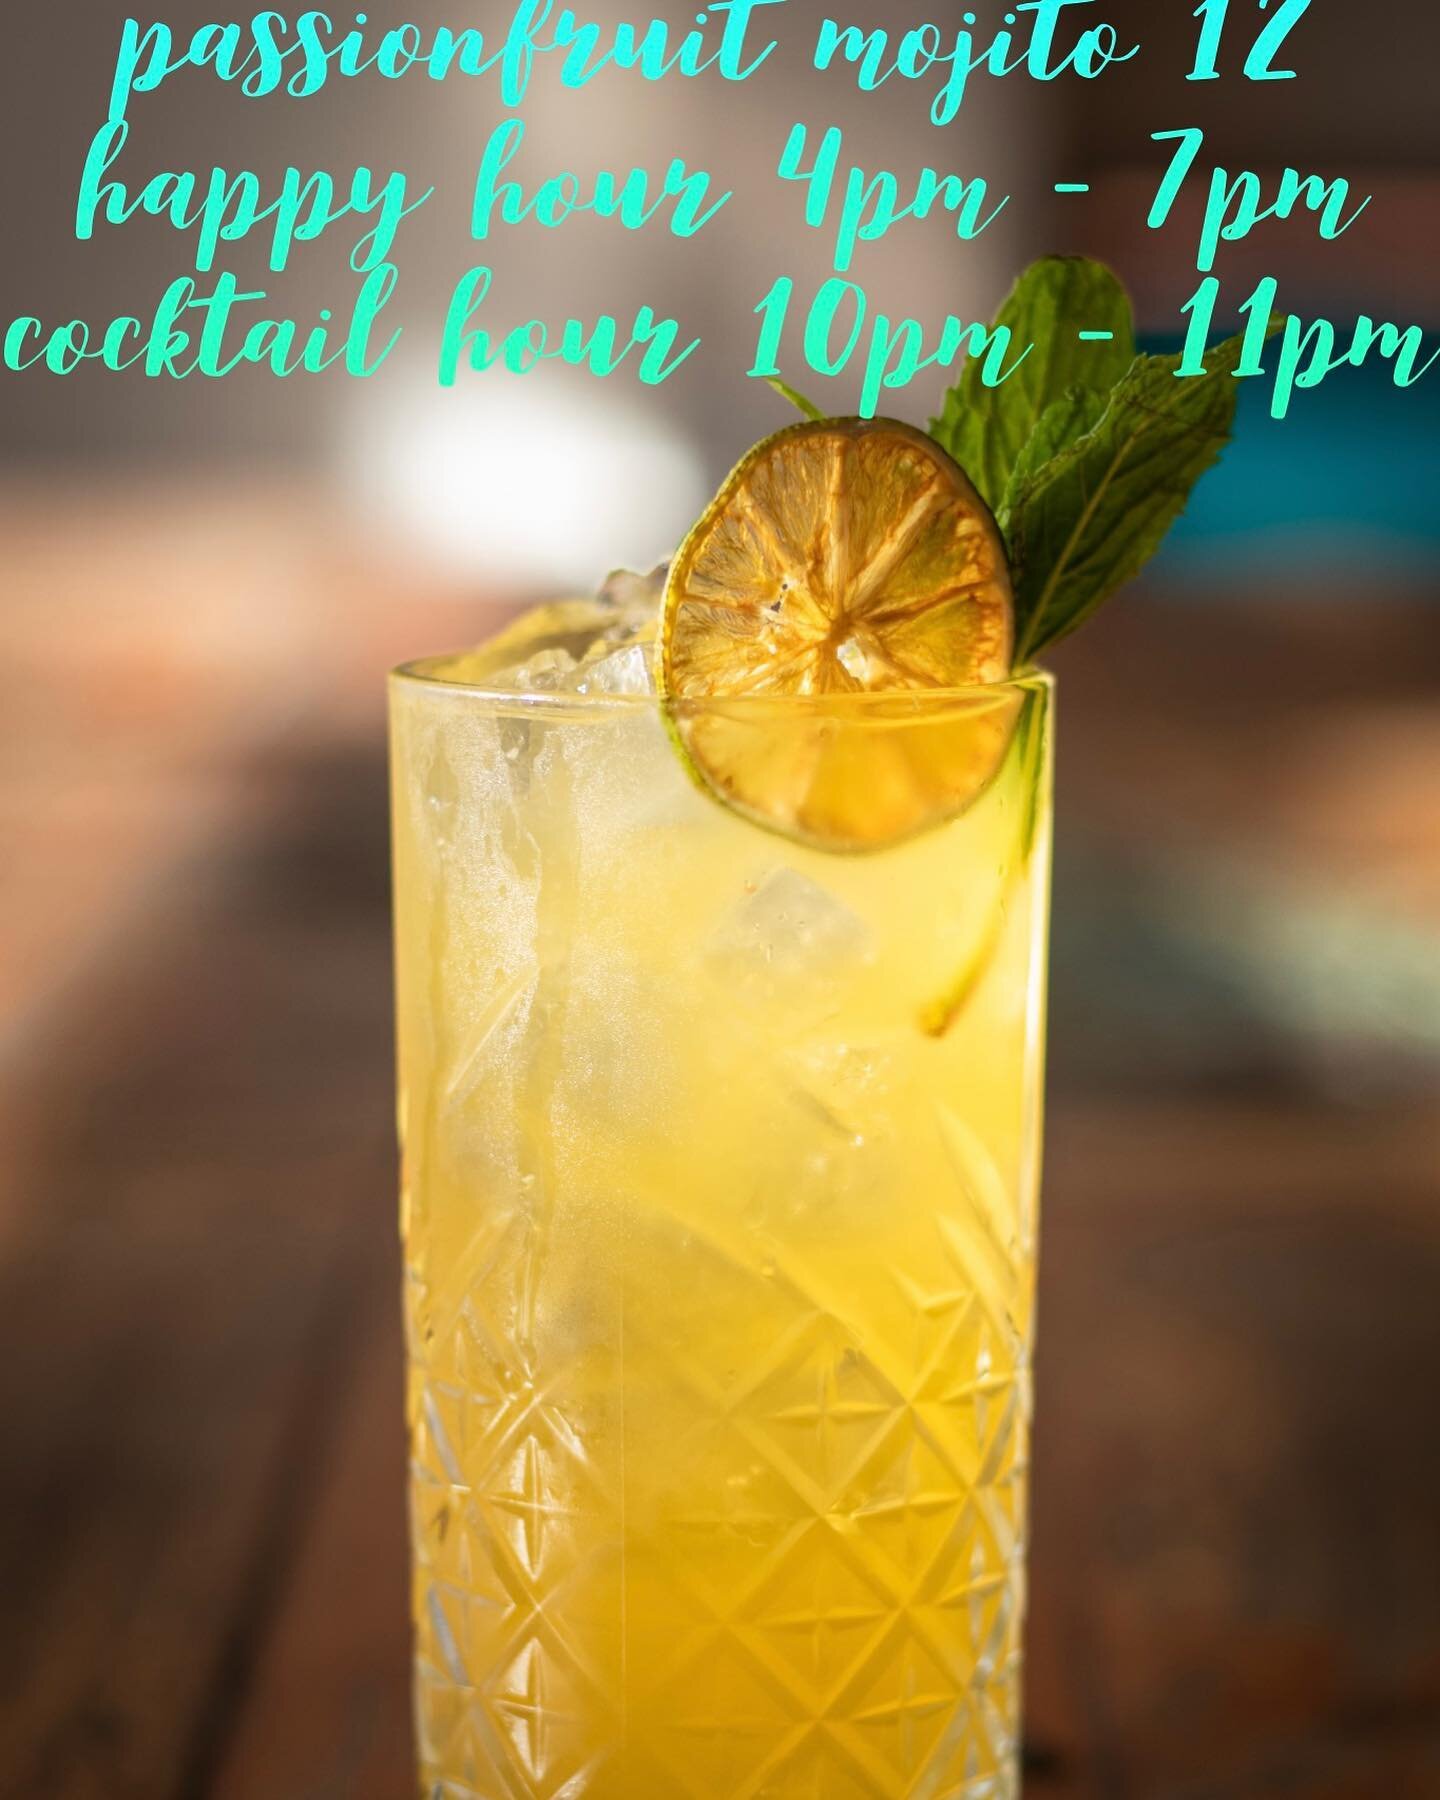 This little number is made for a true jungle goddess, Bacardi, Passionfruit, lemon and mint. Refreshing on a hot day like this one! She&rsquo;s only $12 during happy hour and fully loaded!

@hoohaabar @eatdrinkcheap @eatdrinkplaymelb #summercocktails